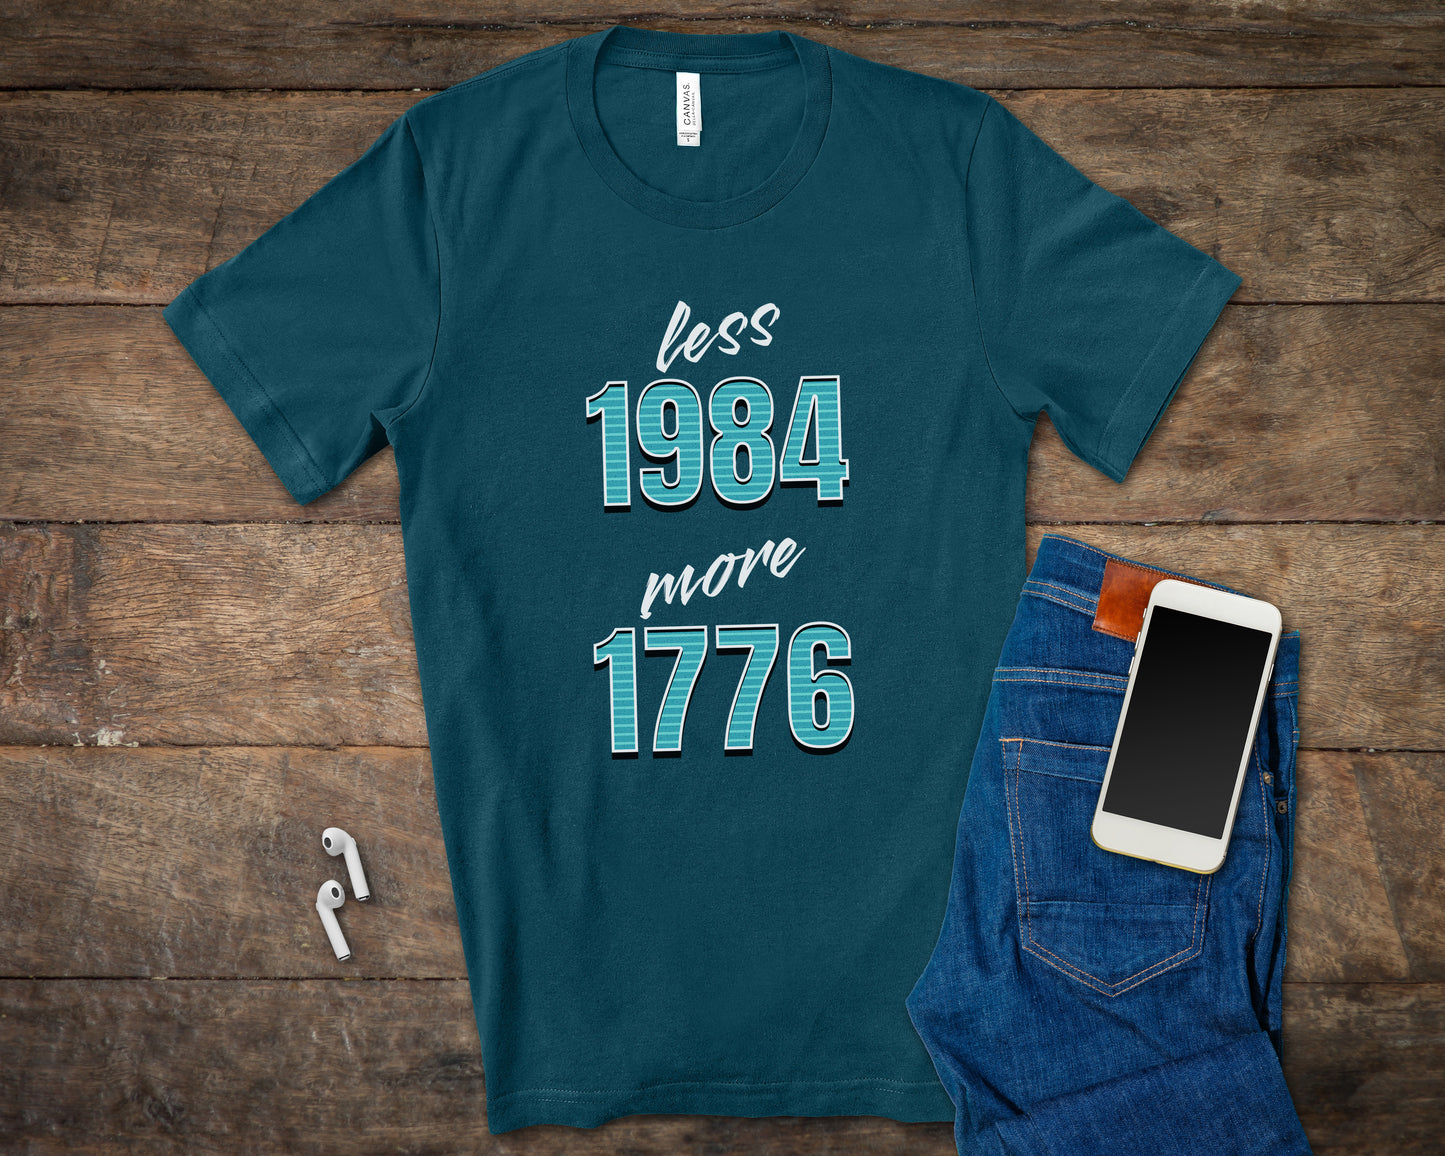 Less 1984 More 1776 Conservative T-shirt for lovers of American Values-T-Shirts-PureDesignTees